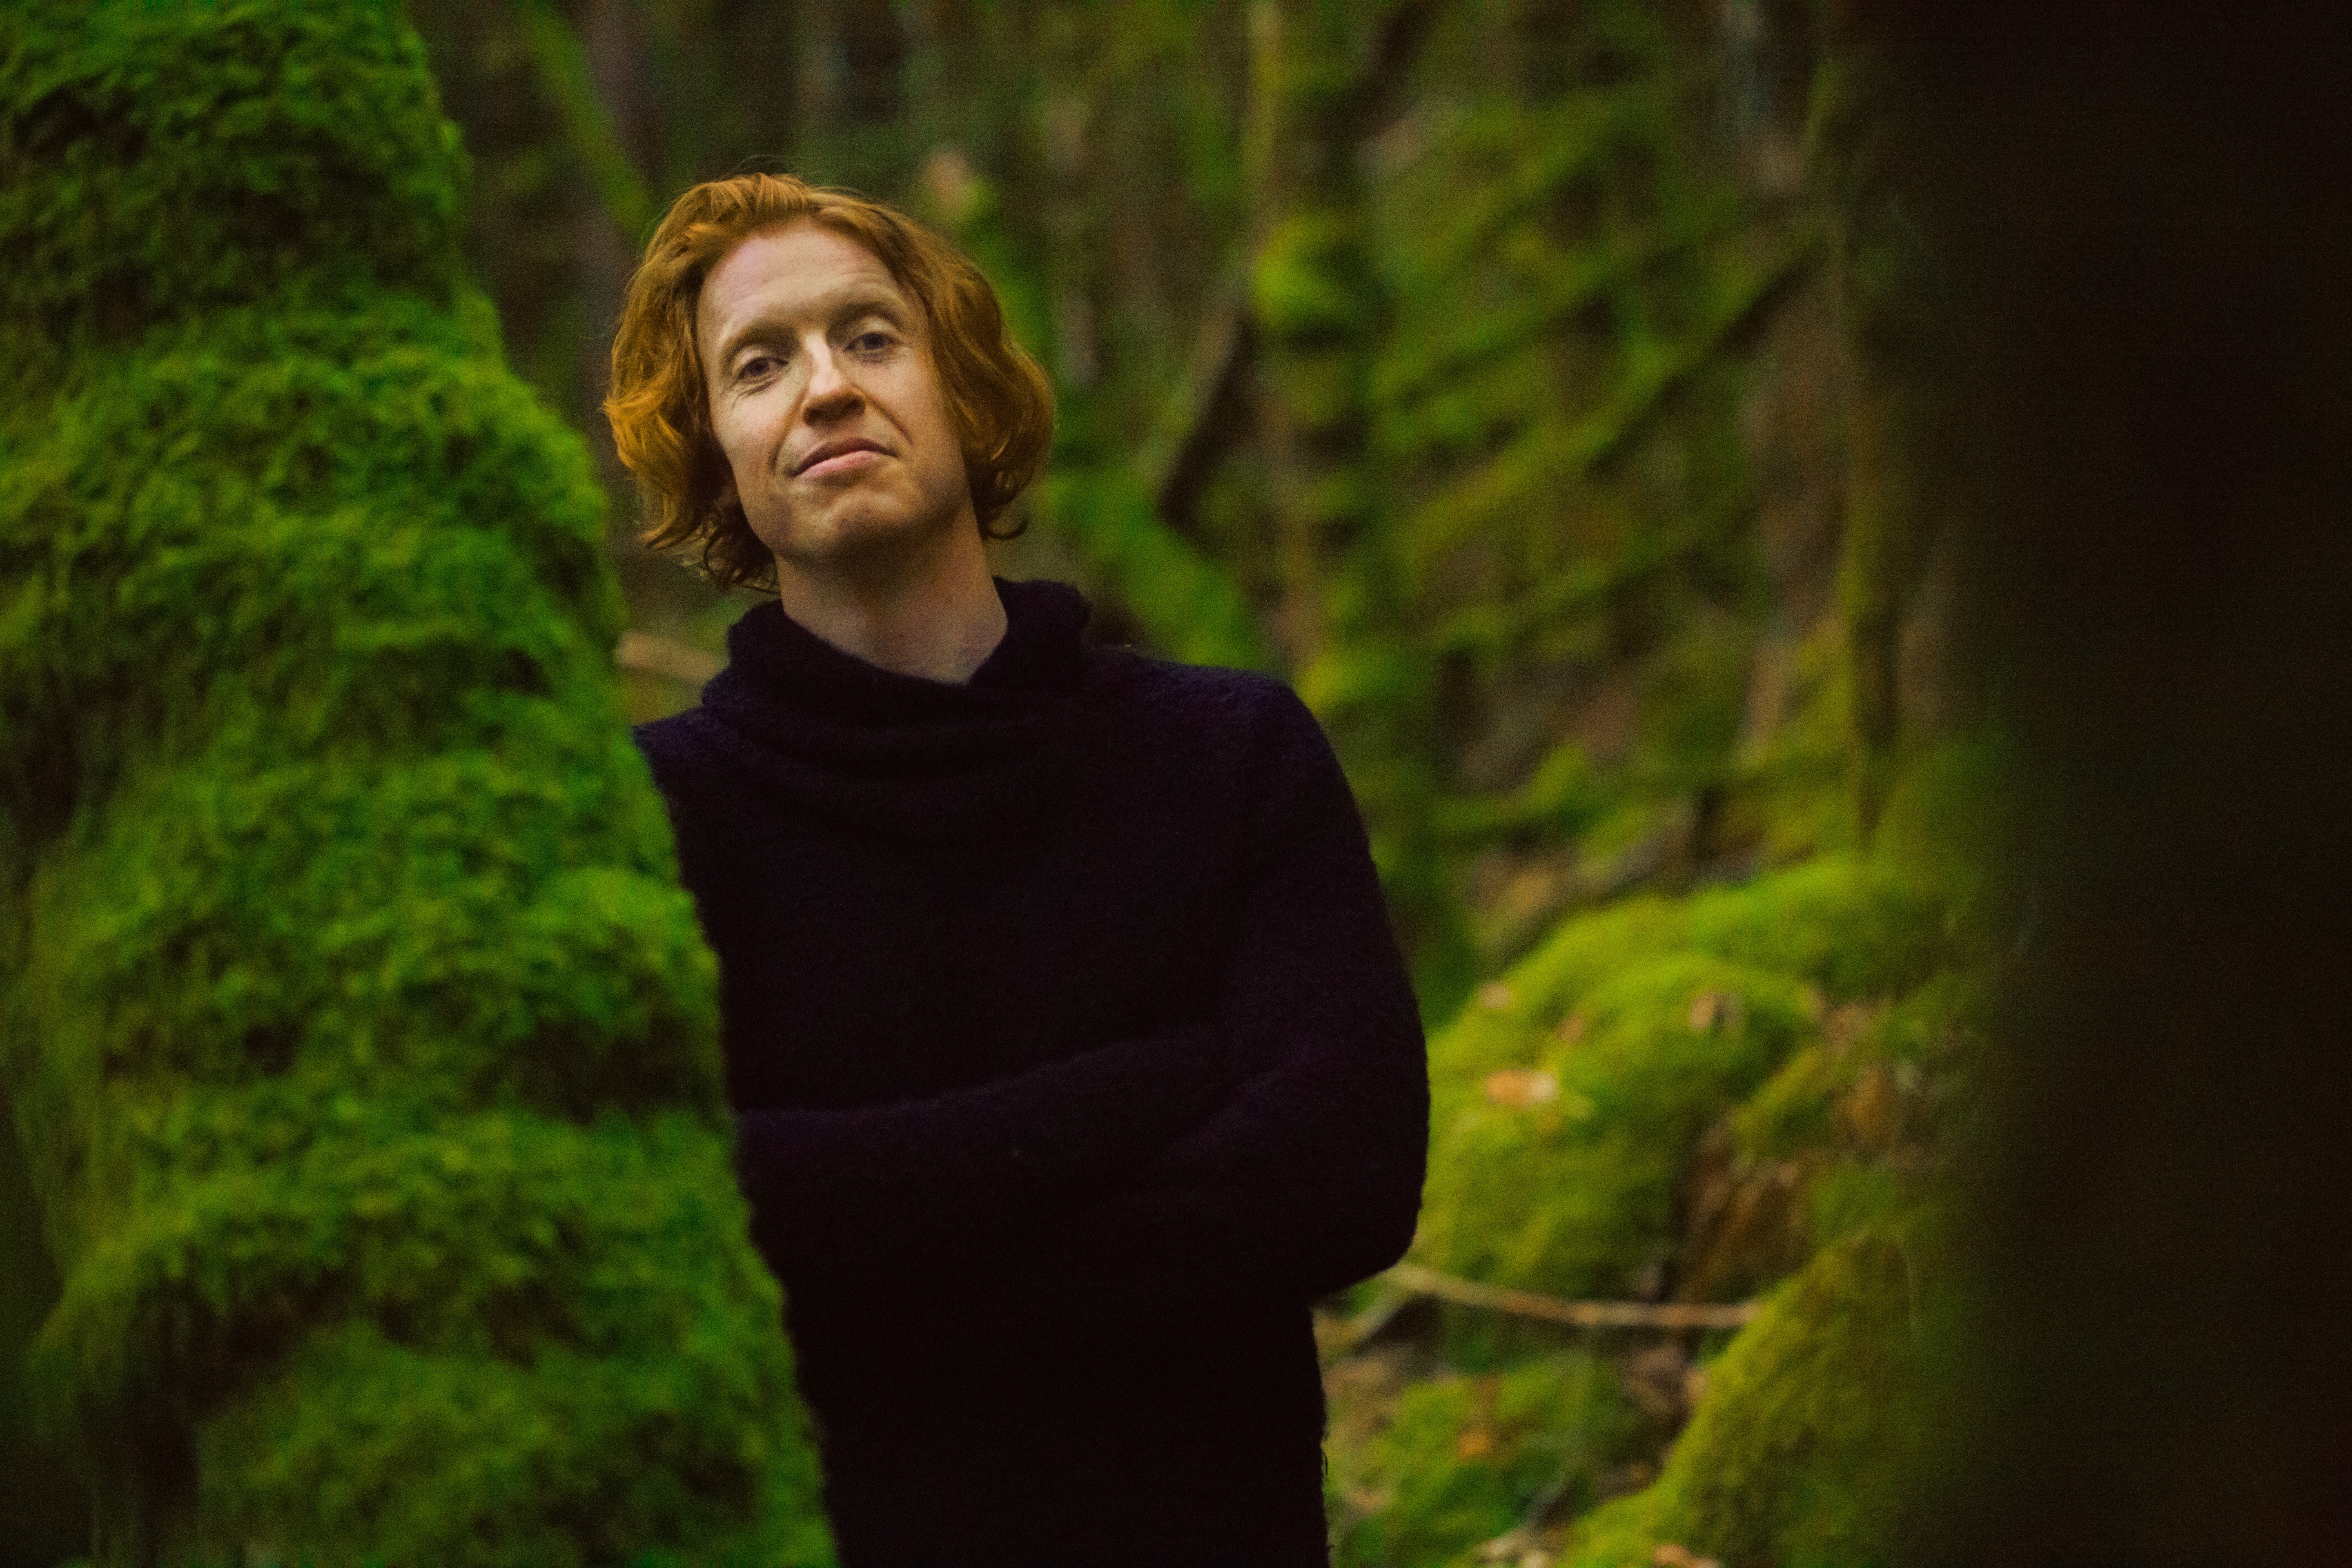 "Song of Wood" by Richard Reed Parry (Arcade Fire) is Northern Transmissions' 'Song of the Day.'